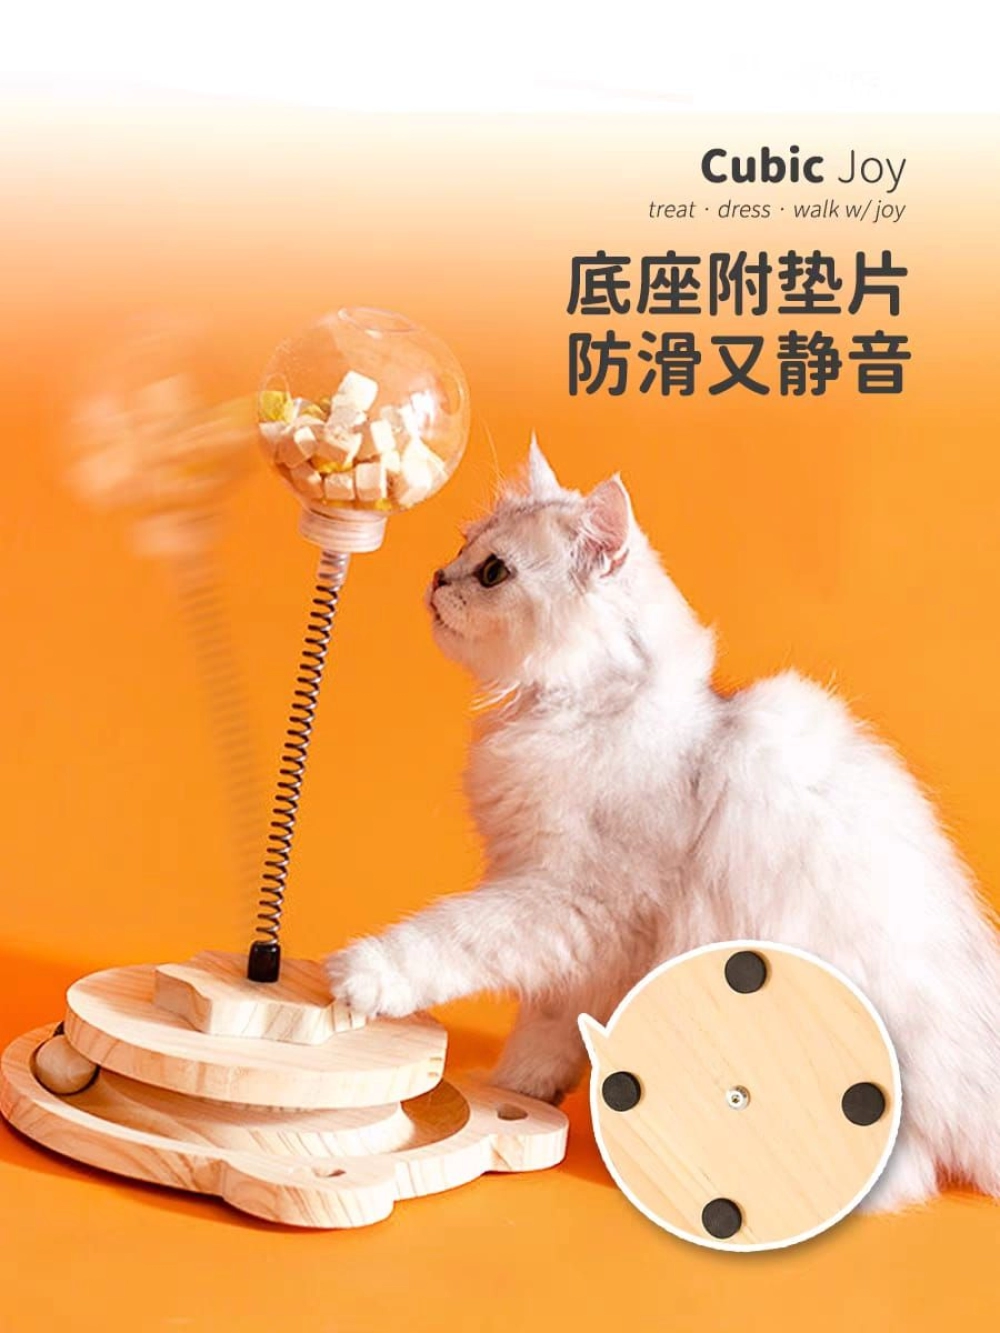 Wood Cat Toy Leaking Ball Cat Turntable Leaking Food Toy Puzzle Interactive Pet Toy Teaser 猫咪漏食球宠物玩具